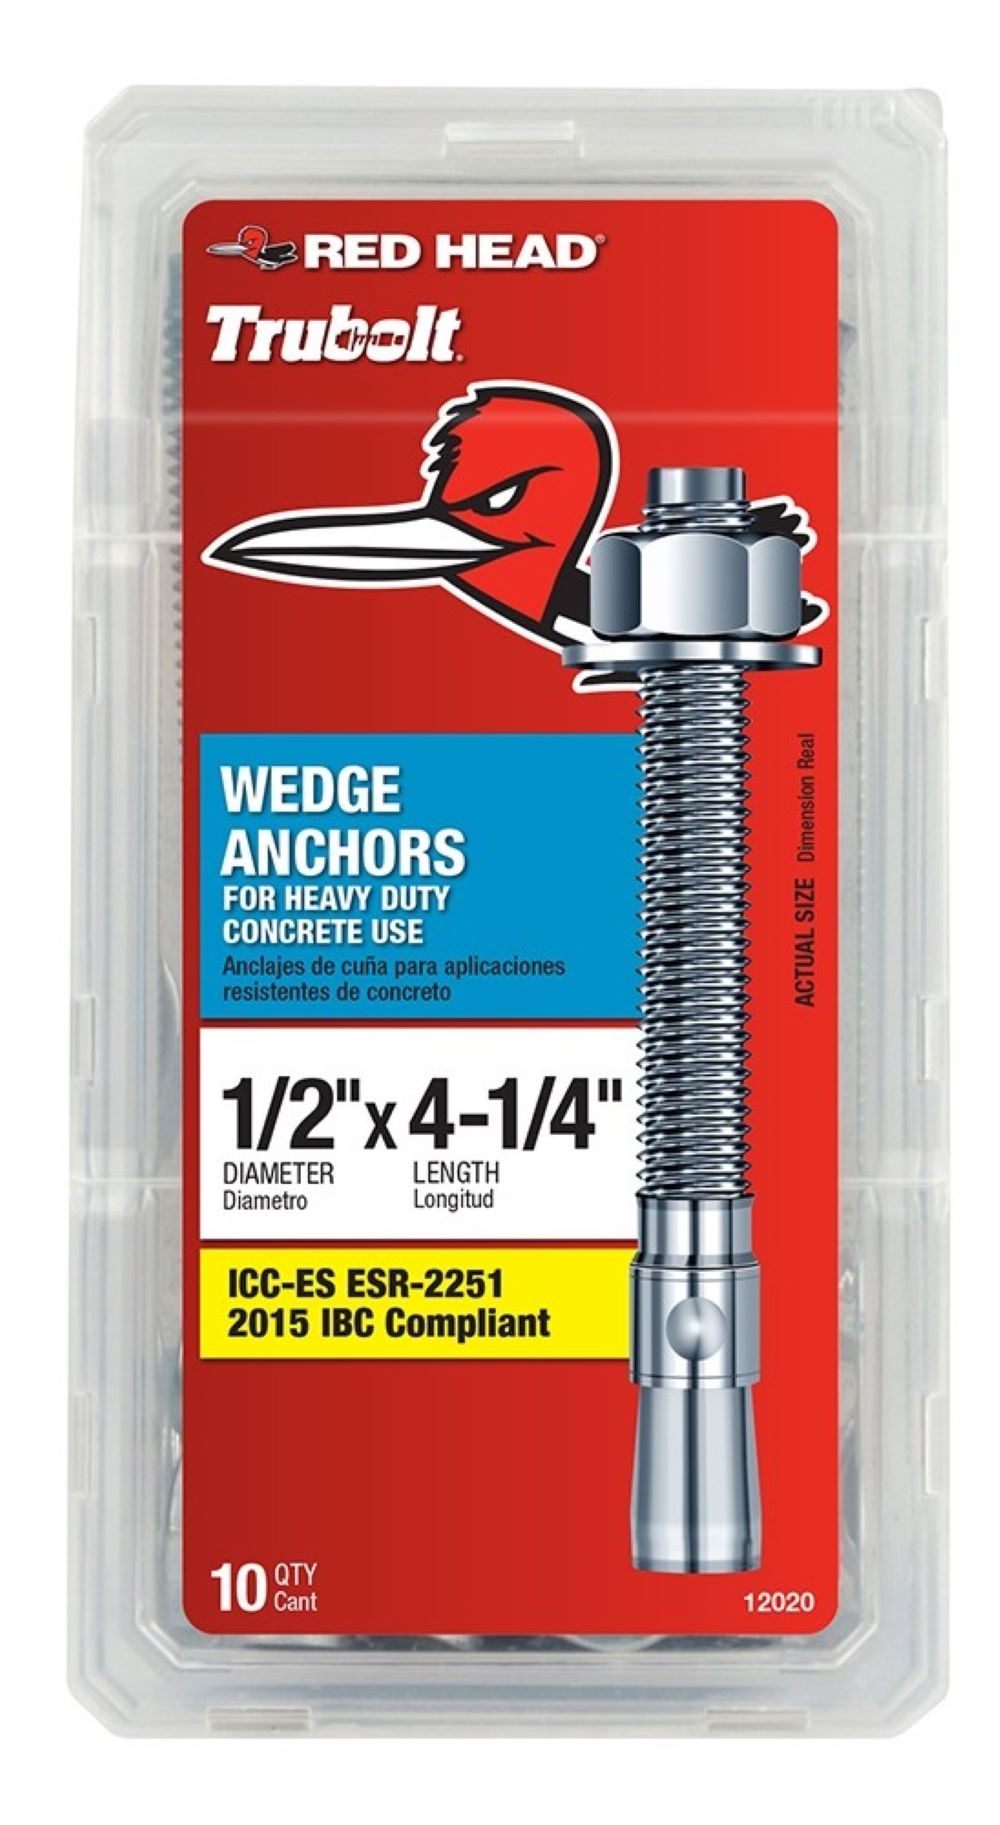 11020 Red Head 1/2" x 4-1/4" Heavy Duty Solid Concrete Wedge Anchors 10-Pack 